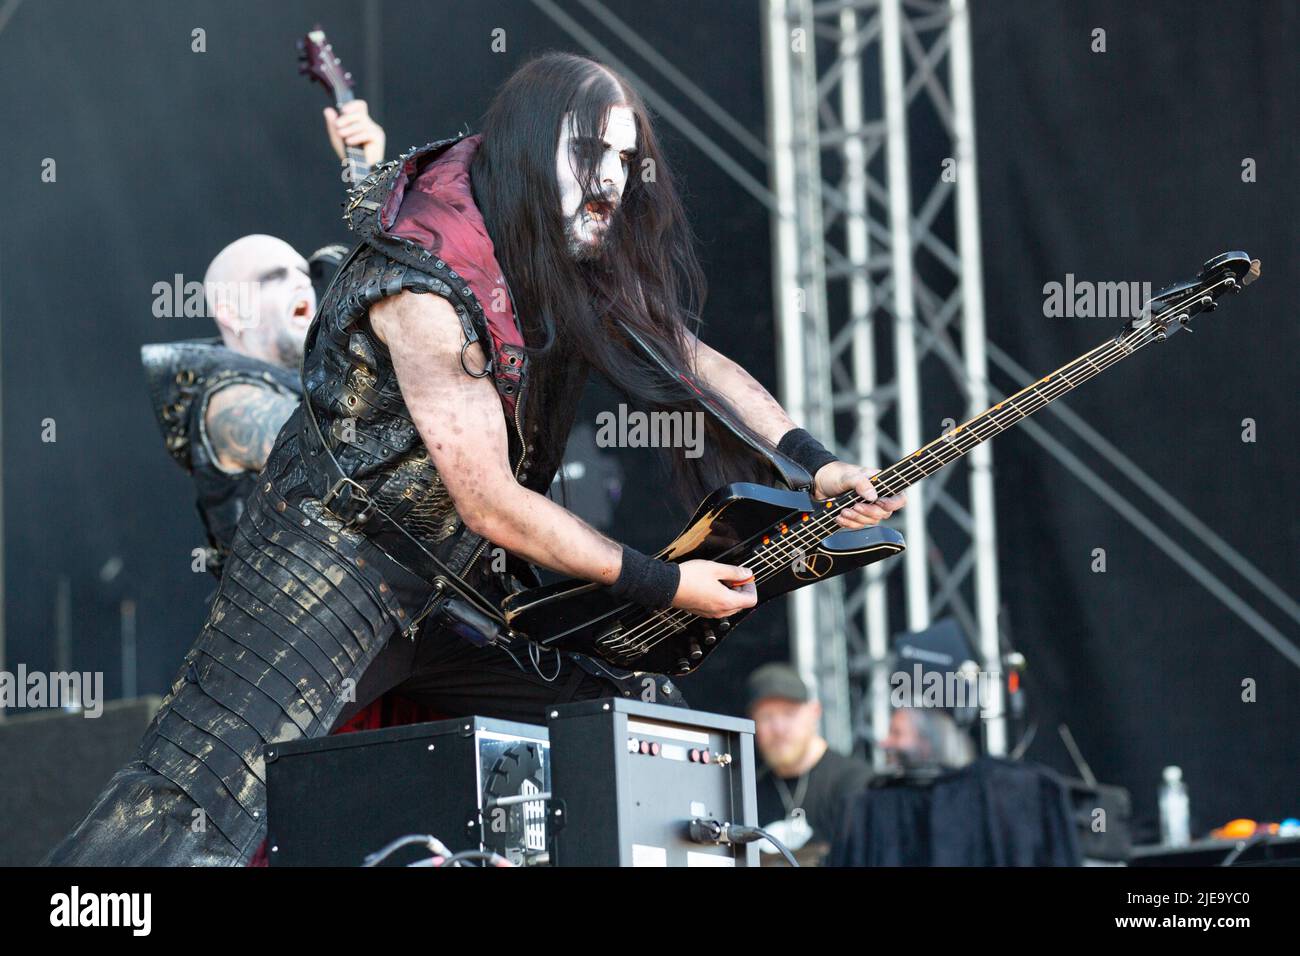 Oslo, Norway. 24th, June 2022. The Norwegian symphonic black metal band Dimmu Borgir performs a live concert during the Norwegian music festival Tons of Rock 2022 in Oslo. Here bass player Victor Brandt is seen live on stage. (Photo credit: Gonzales Photo - Per-Otto Oppi). Stock Photo